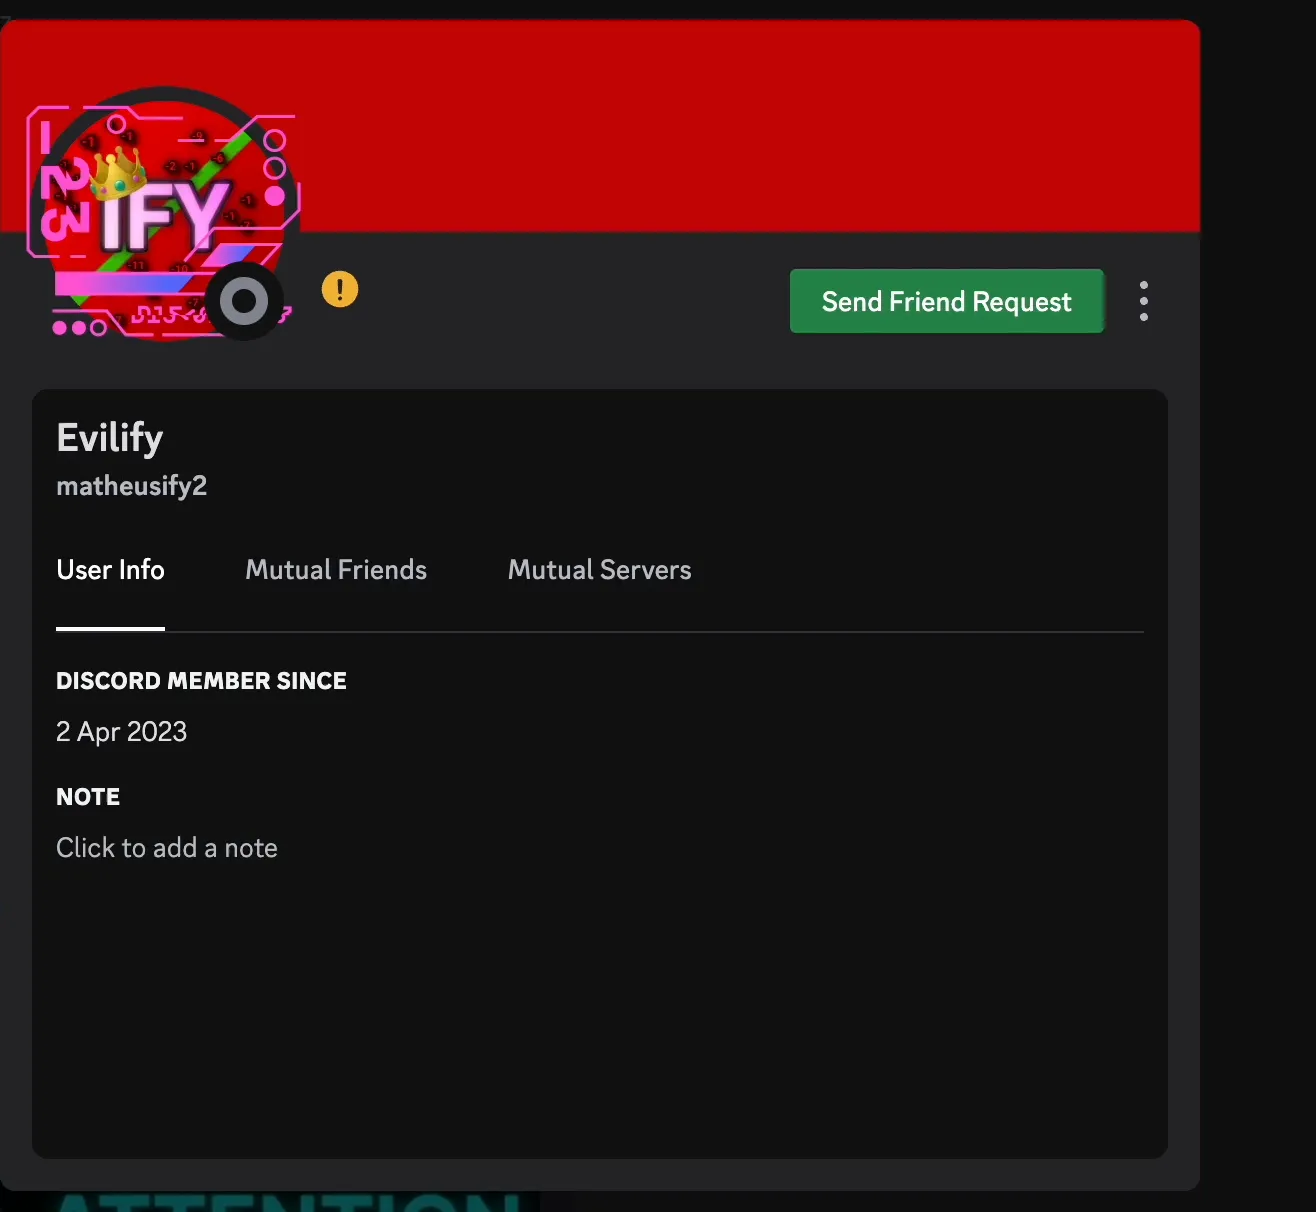 Matheus&#x27; profile, with his display name set as "Evilify", with the same red profile picture from the incident